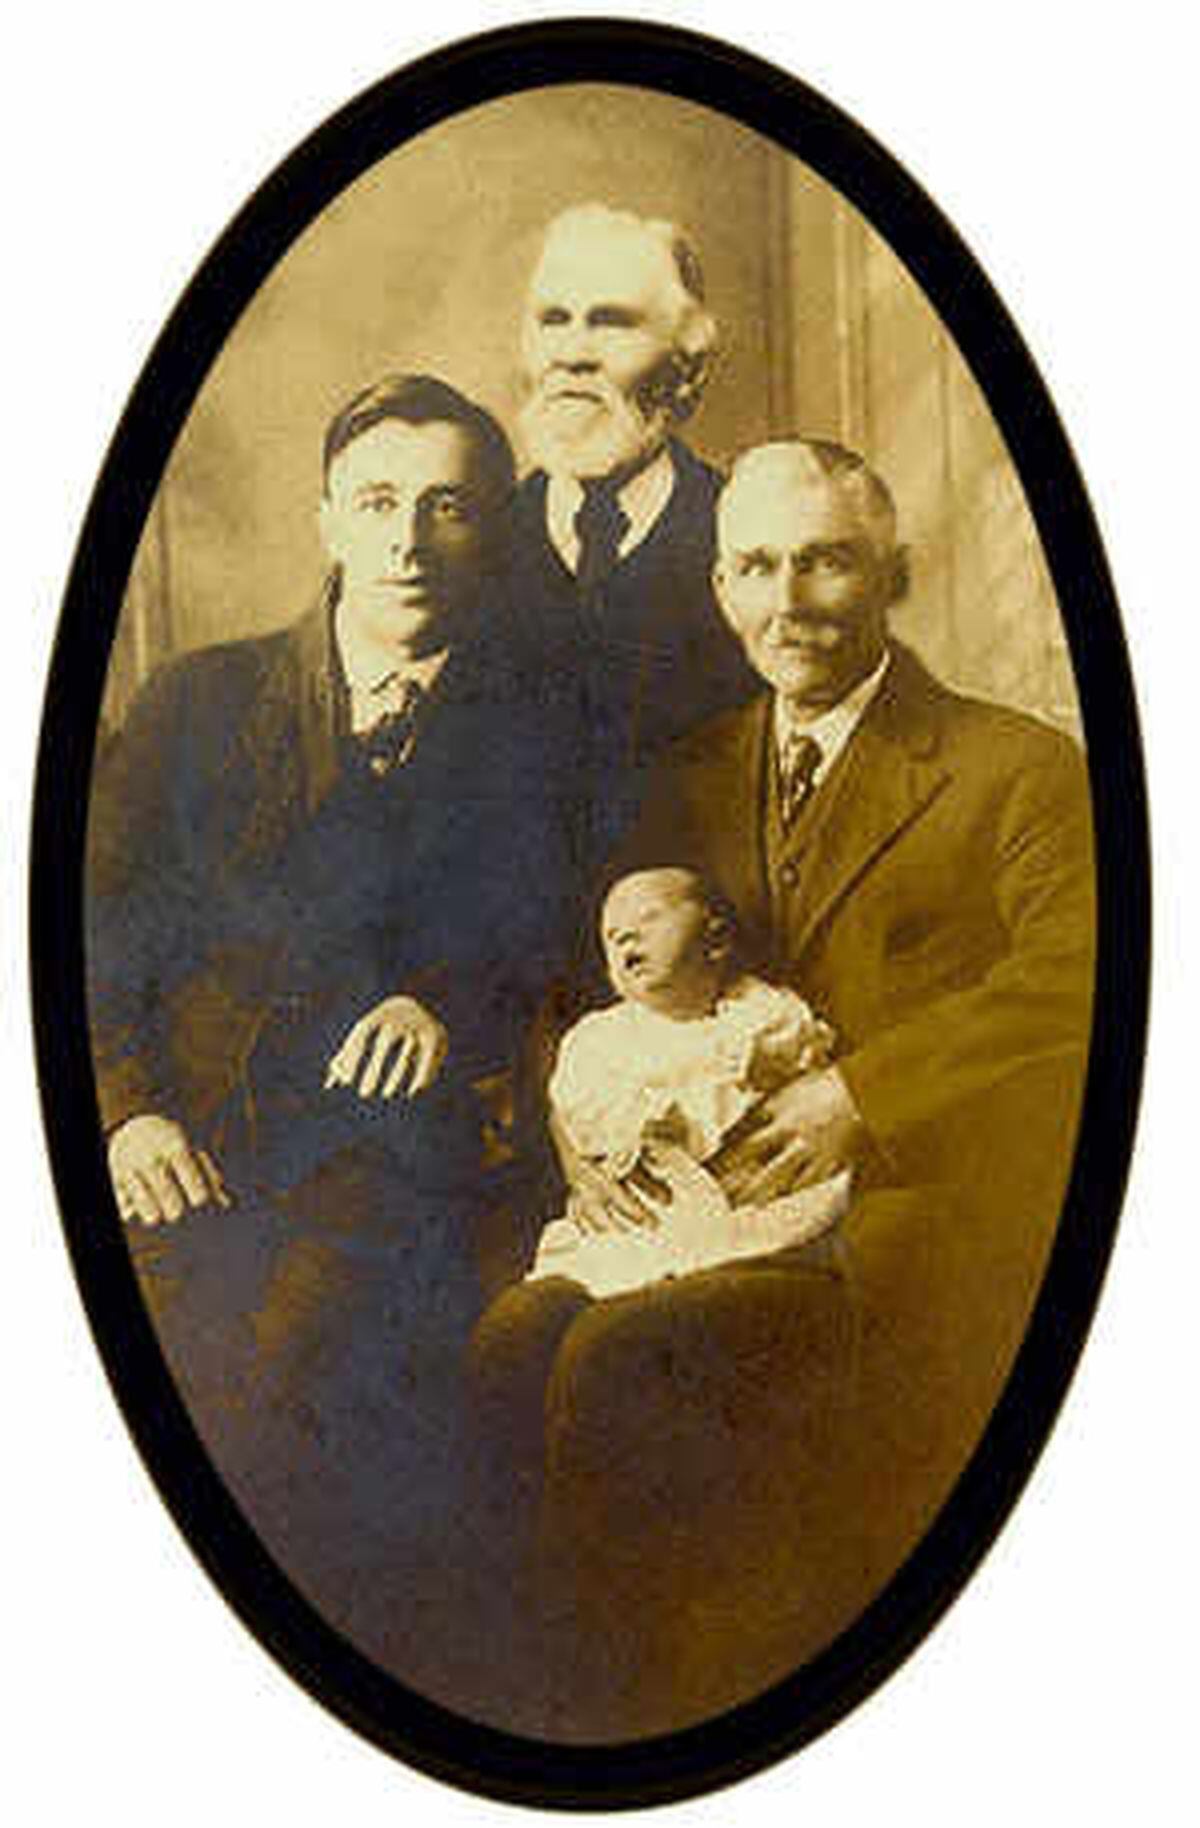 In this four generations photograph is, clockwise from top, Jean Thomas Corbet (1836-1926), his son Alfred John Corbet (1864-1937), on his lap Alfred John Corbet (Christian's grandfather, 1922-1989) and his father Wilfred John Corbet (1893-1971). The photo was put together using two pictures at the suggestion of Guernsey photographer T. A. Grut and was created to celebrate the arrival of Jean Thomas Corbet's first great-grandson.